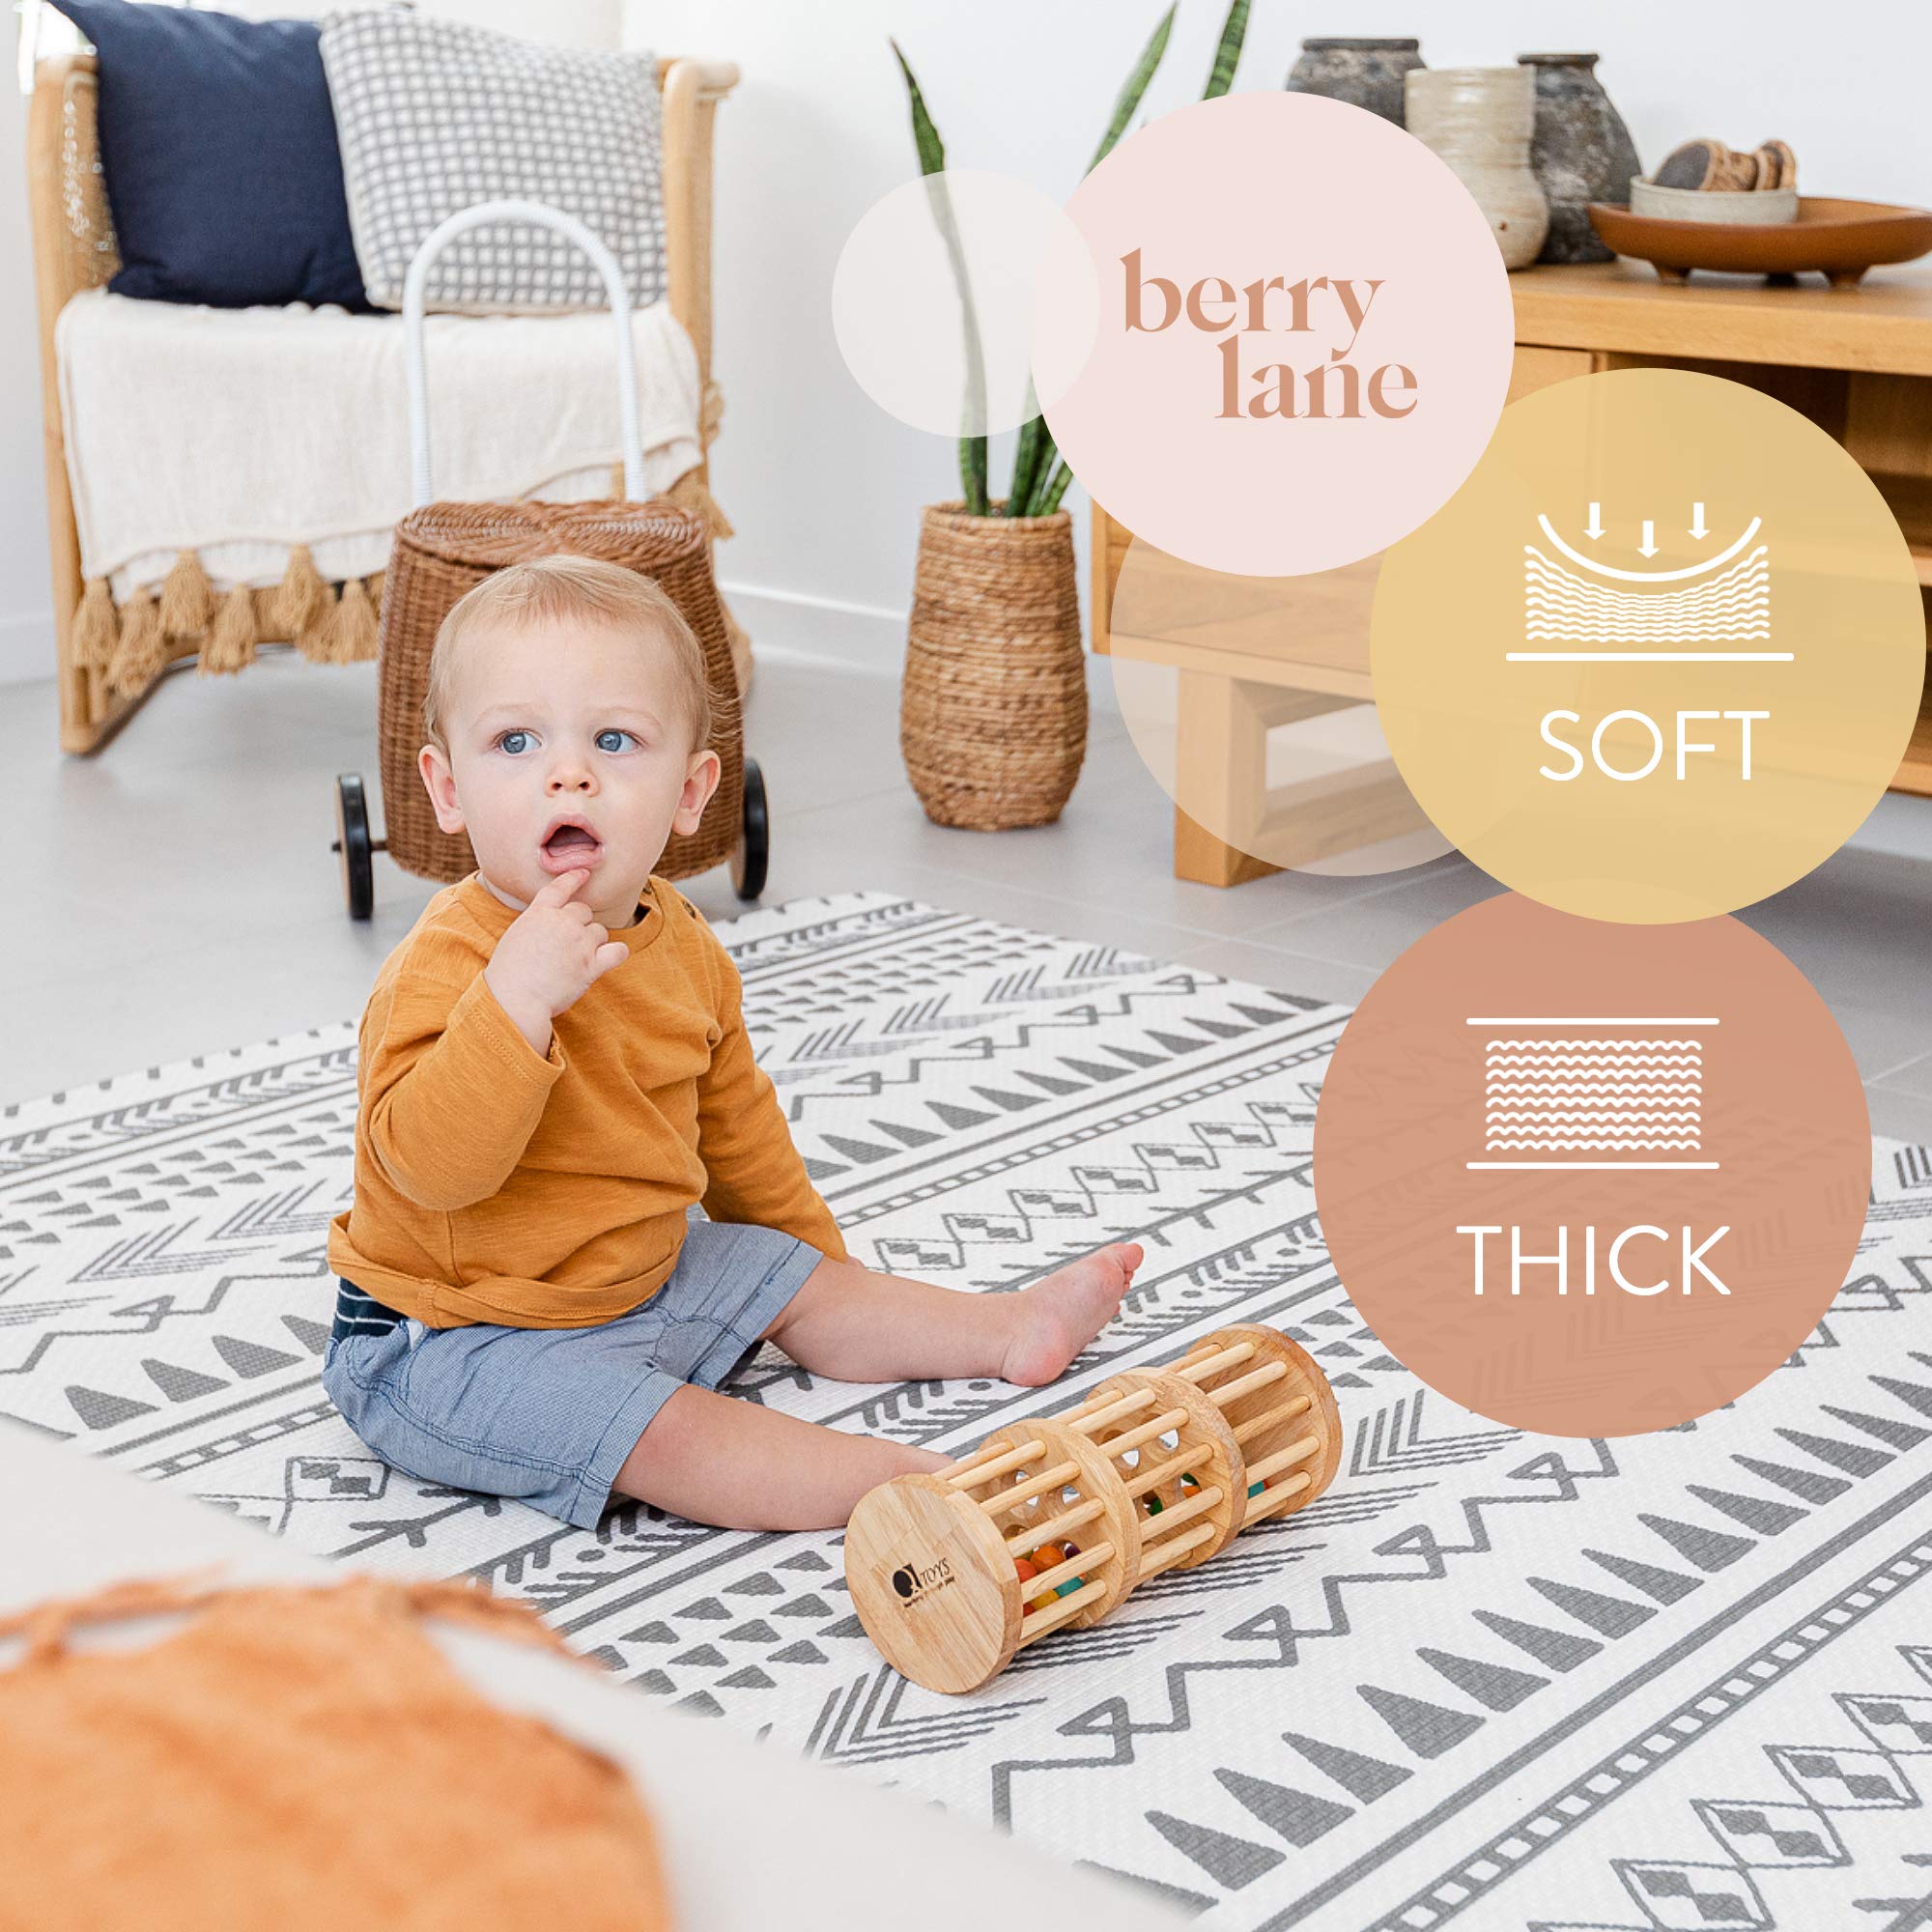 Baby Play Mat for Infants | One-Piece Reversible Foam Floor Mat | Large | Eco-Friendly | Extra Soft | Thick | Non-Toxic | Toddlers | Kids (Mixed Marks Mint/Natural, Large 78” x 55”)